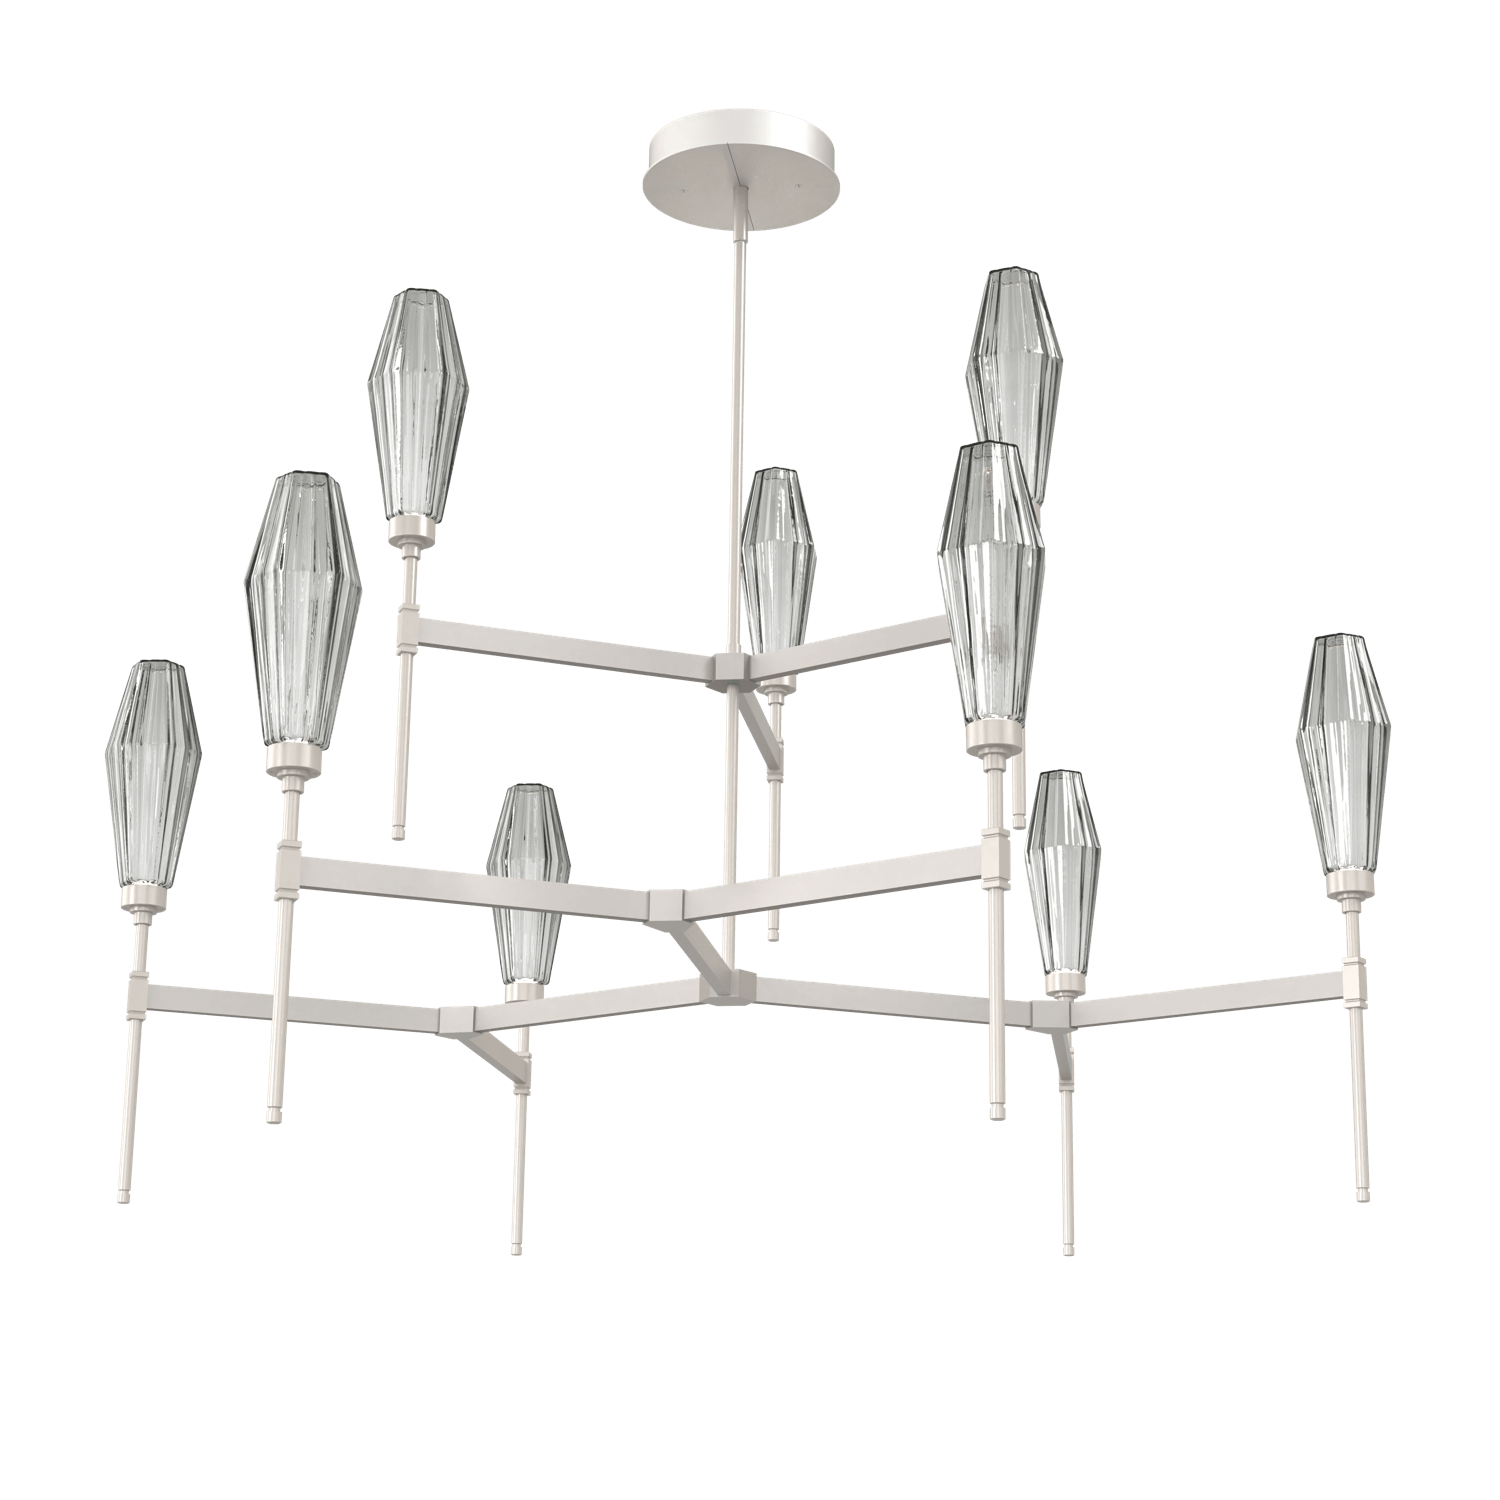 CHB0049-54-BS-RS-Hammerton-Studio-Aalto-54-inch-round-two-tier-belvedere-chandelier-with-metallic-beige-silver-finish-and-optic-ribbed-smoke-glass-shades-and-LED-lamping